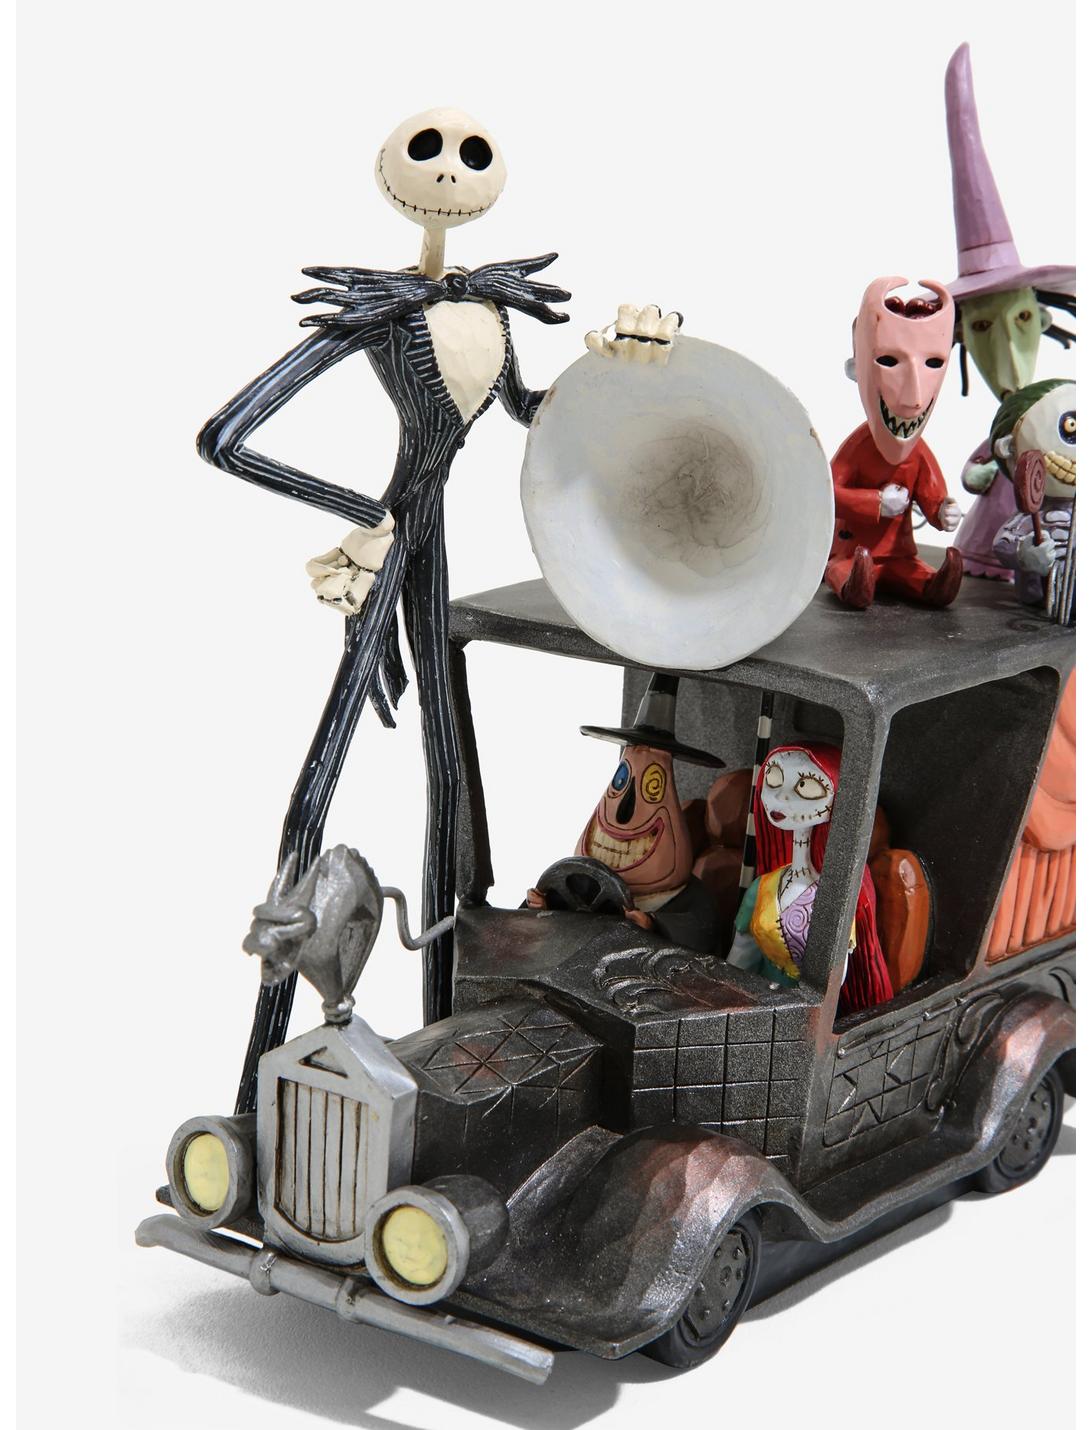 Dept 56 Nightmare Before Christmas Village NEW 2019 THE MAYOR'S CAR 6003314